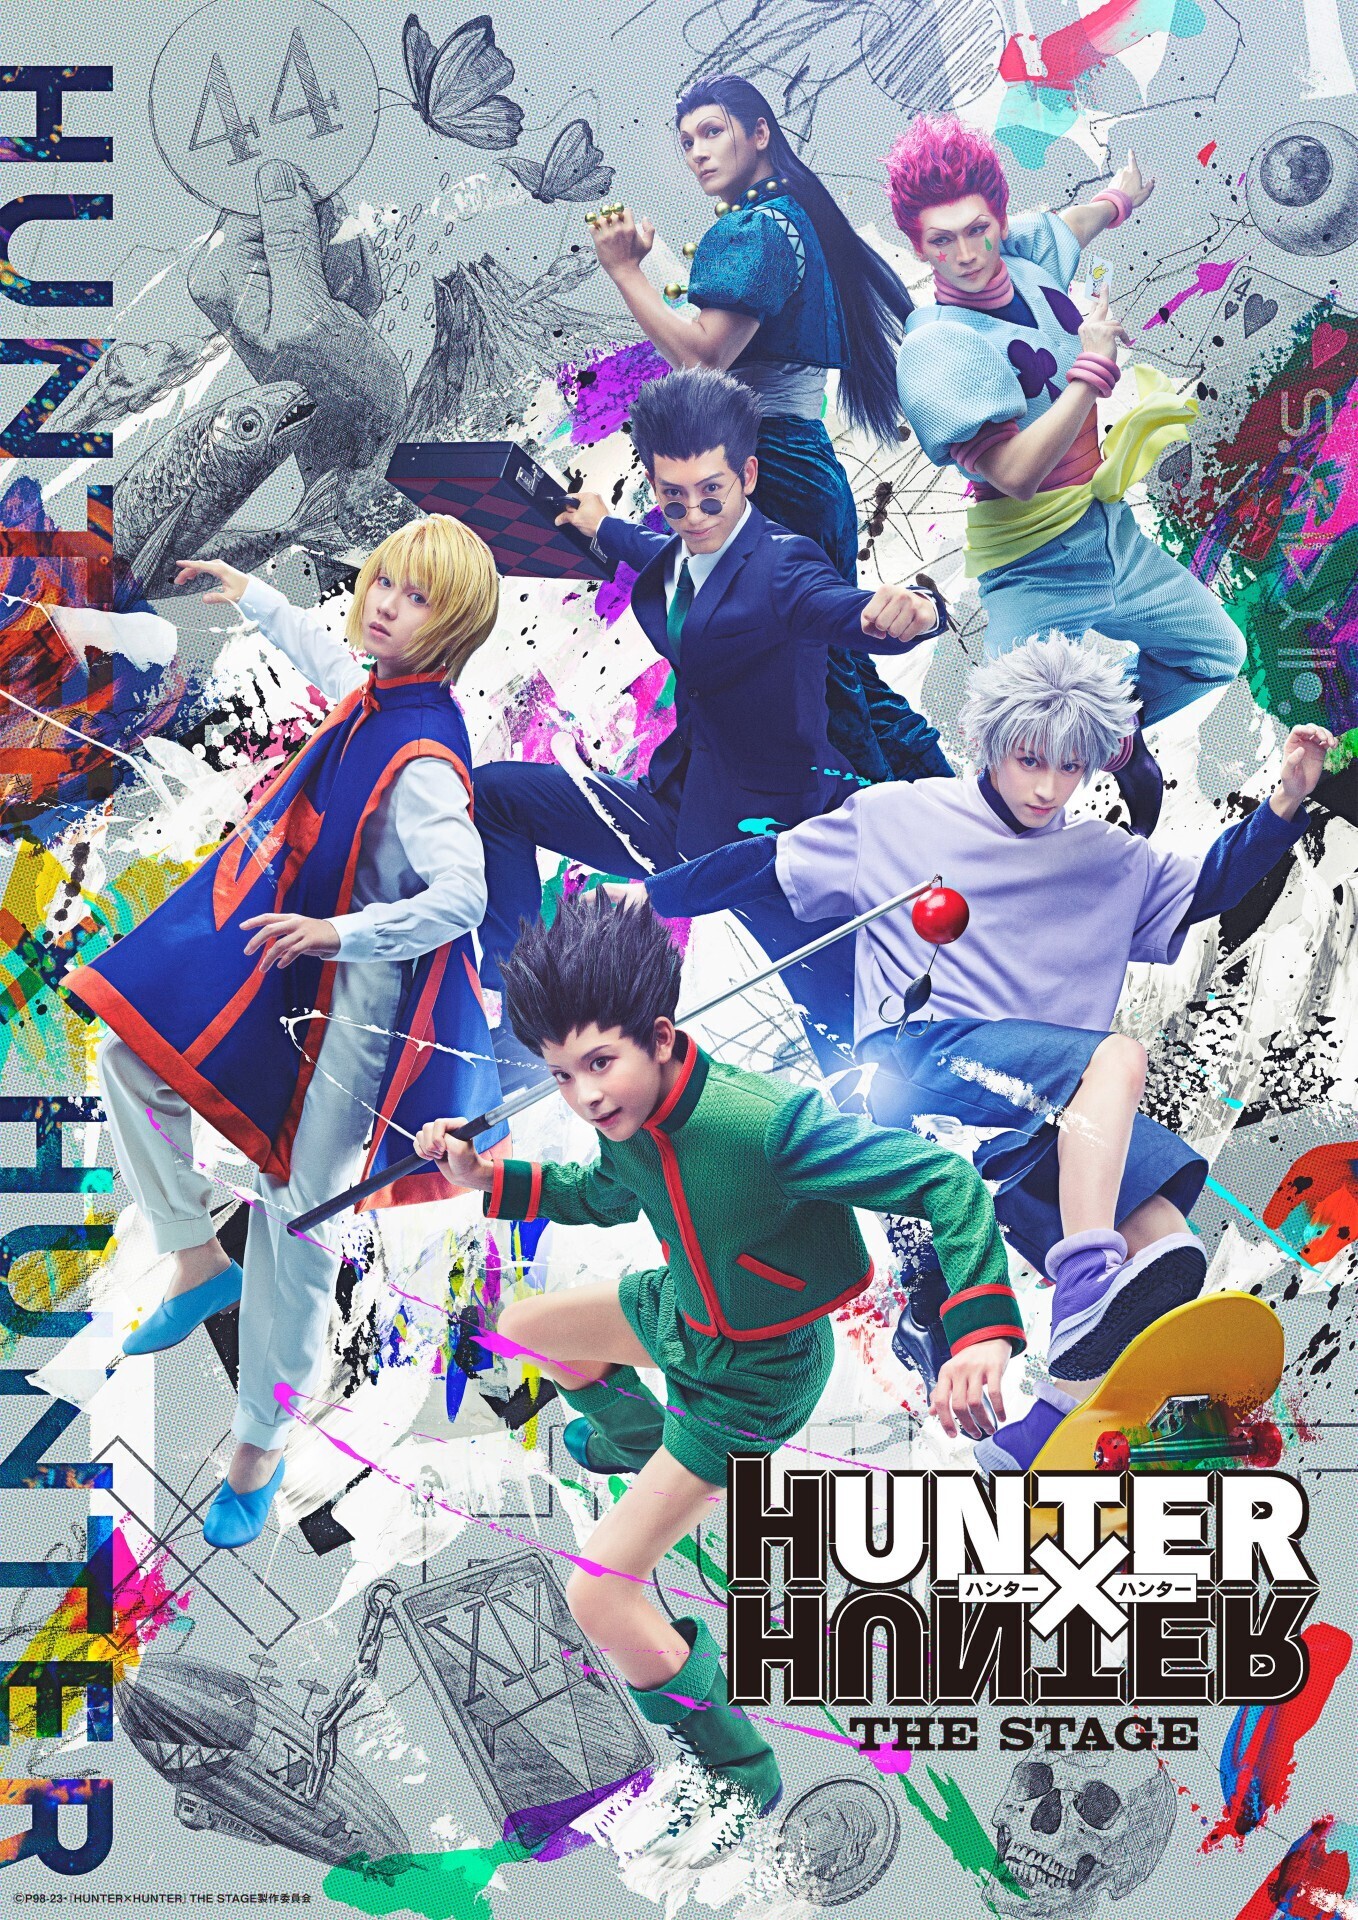 HUNTER×HUNTER”THE STAGE | ローチケ LIVE STREAMING